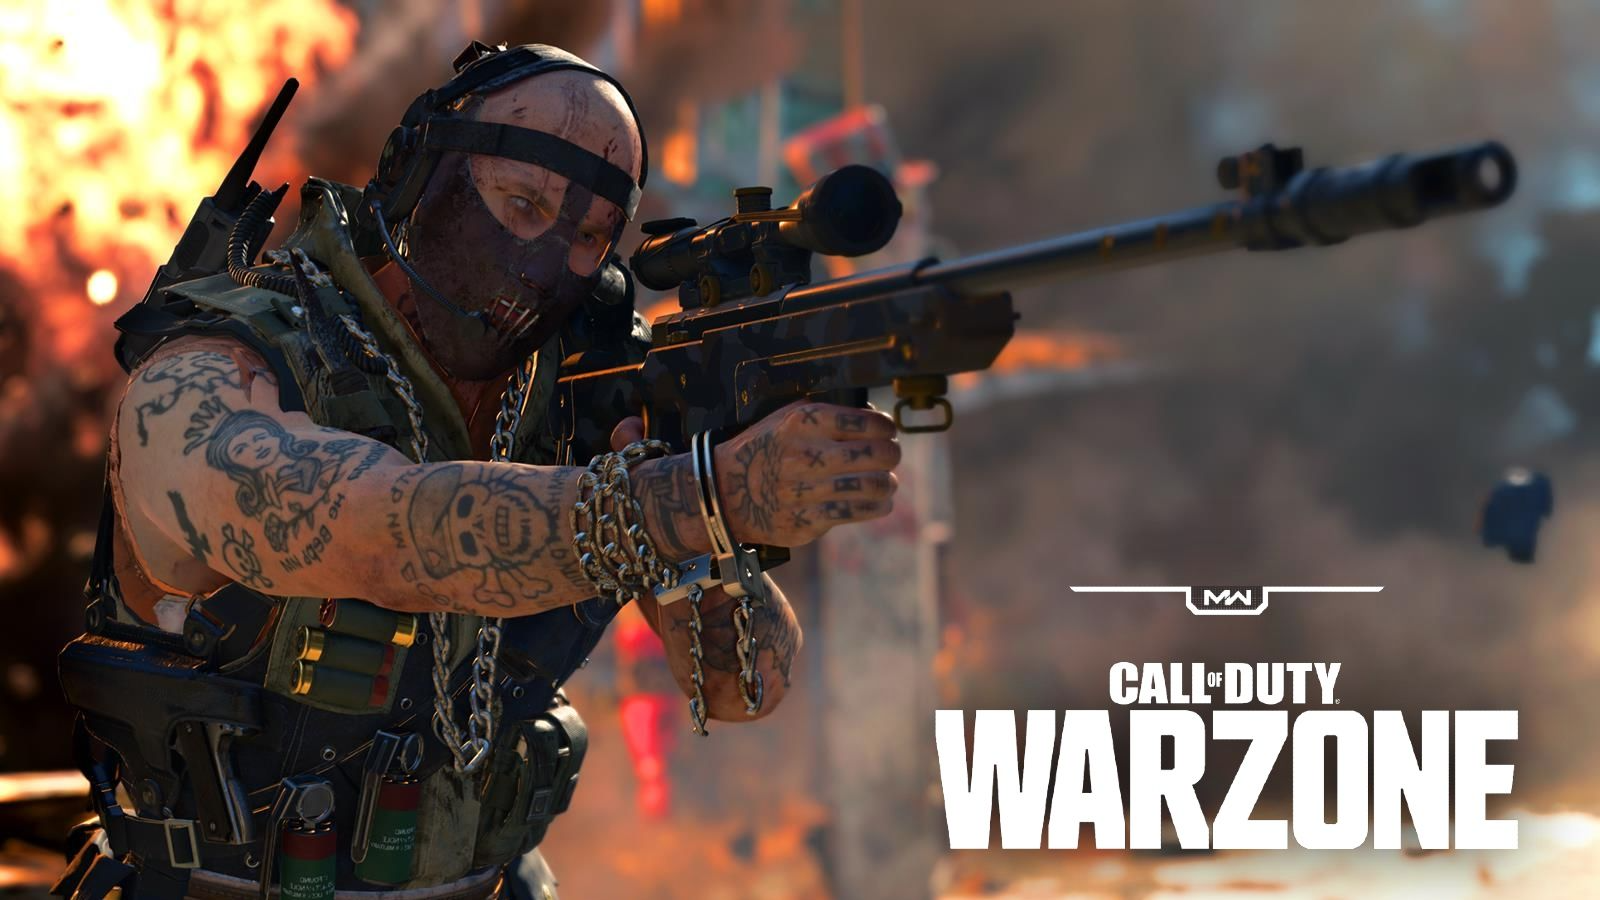 Warzone streamer Jukeyz wakes up from coma, asks pressing question about CoD’s next title